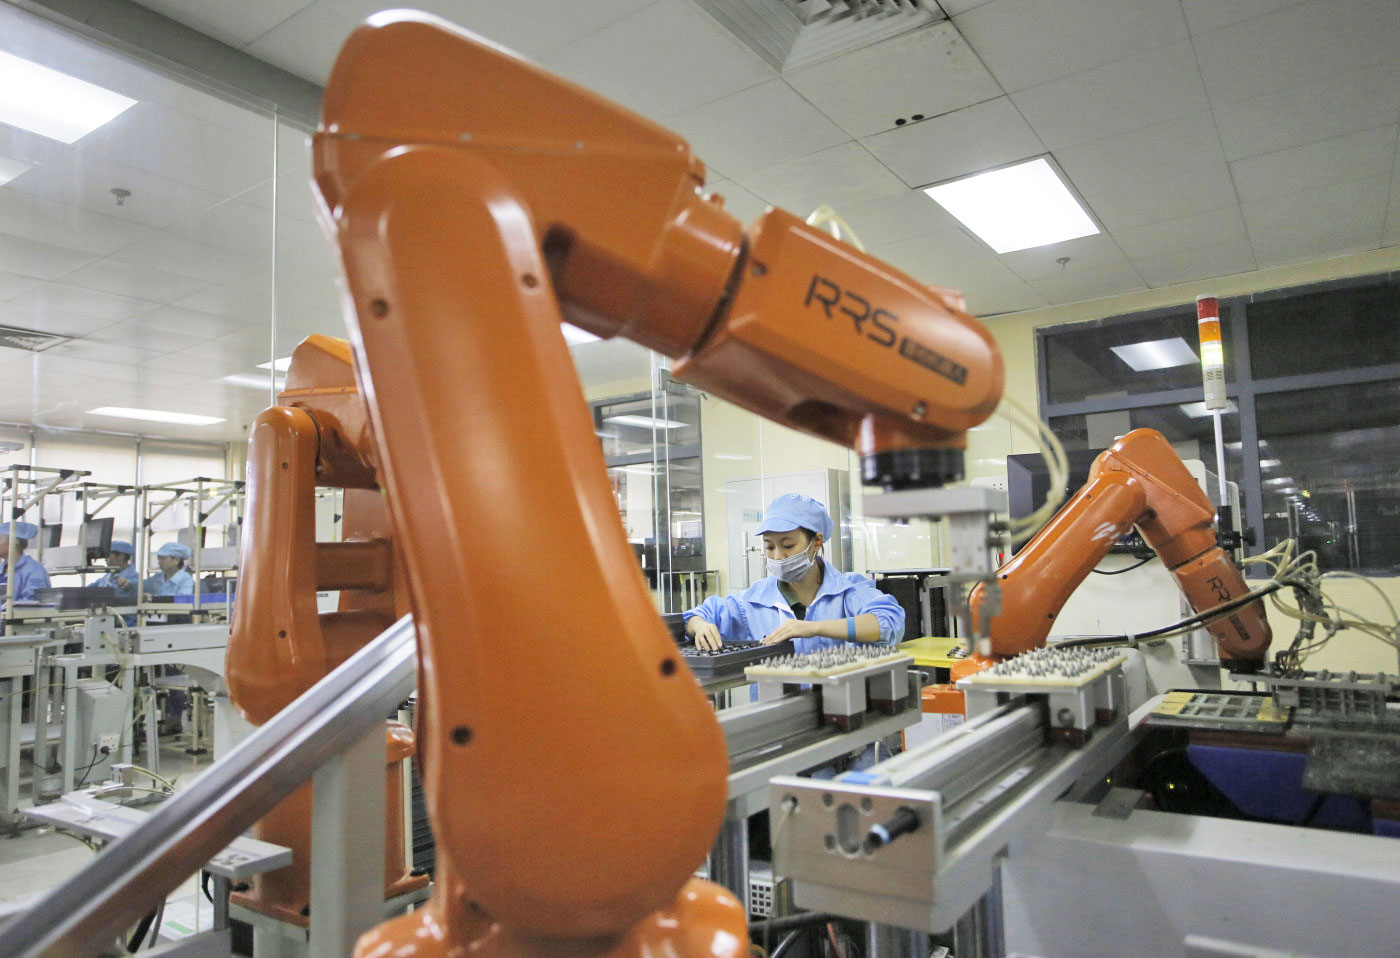 Foxconn replaces 60,000 human workers with robots